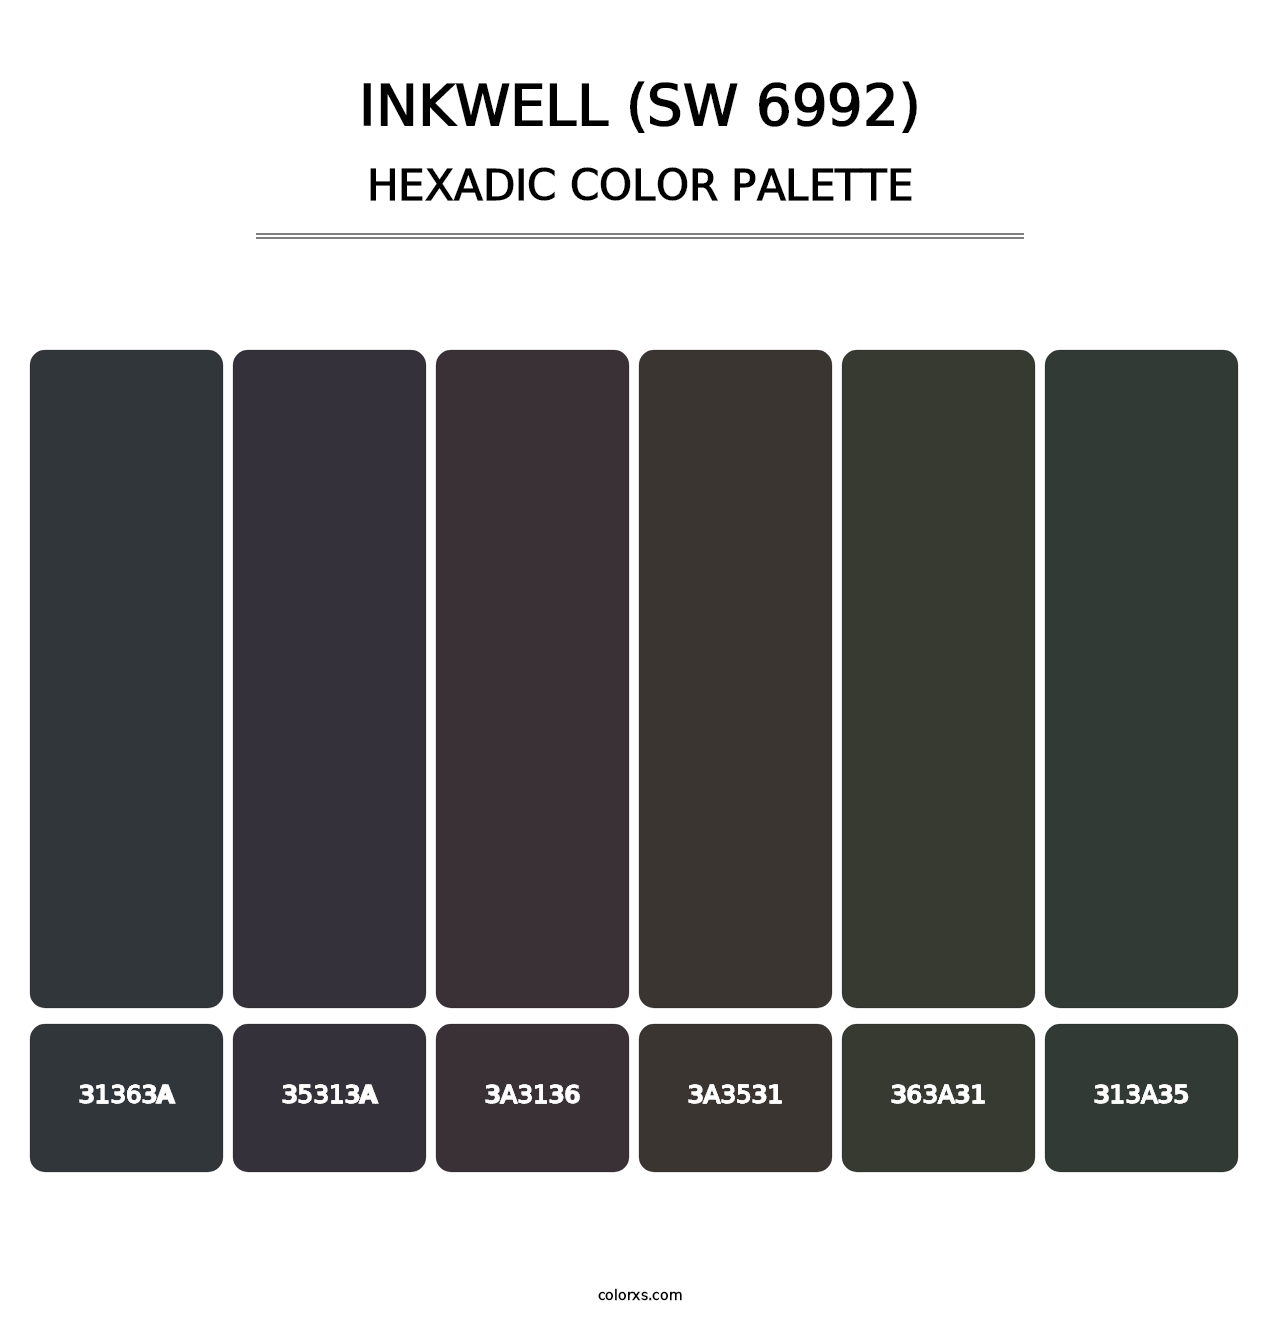 Inkwell (SW 6992) - Hexadic Color Palette